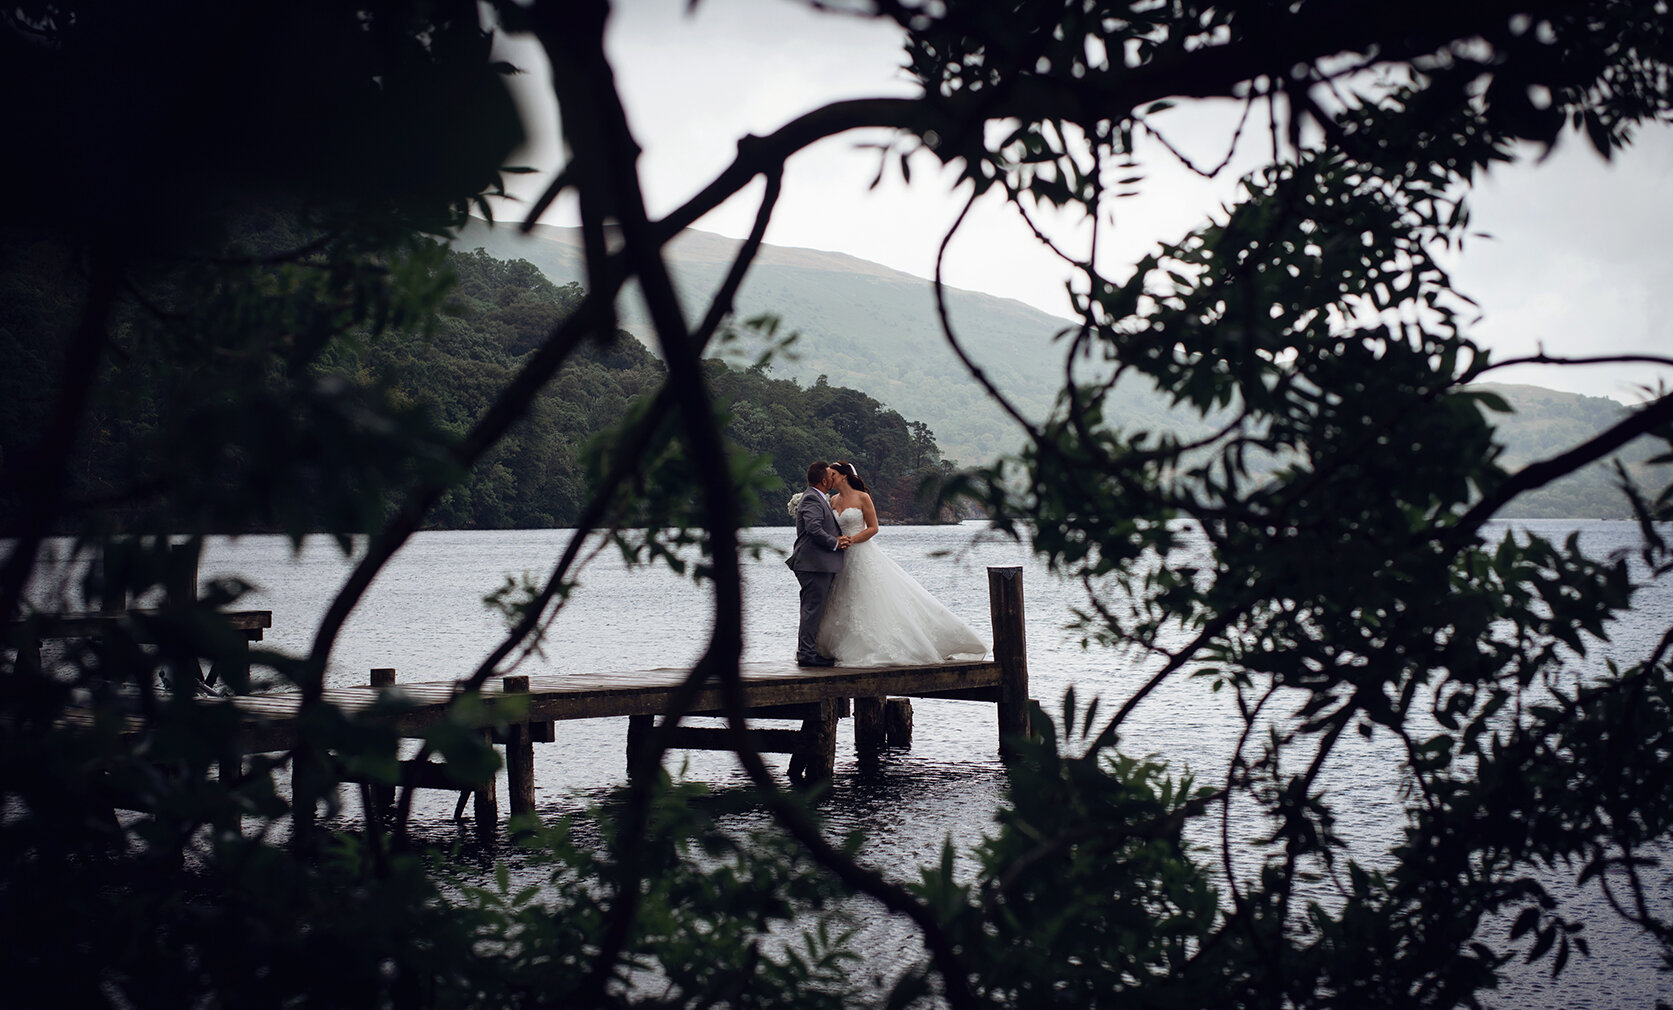 The bride and groom standing on the jetty